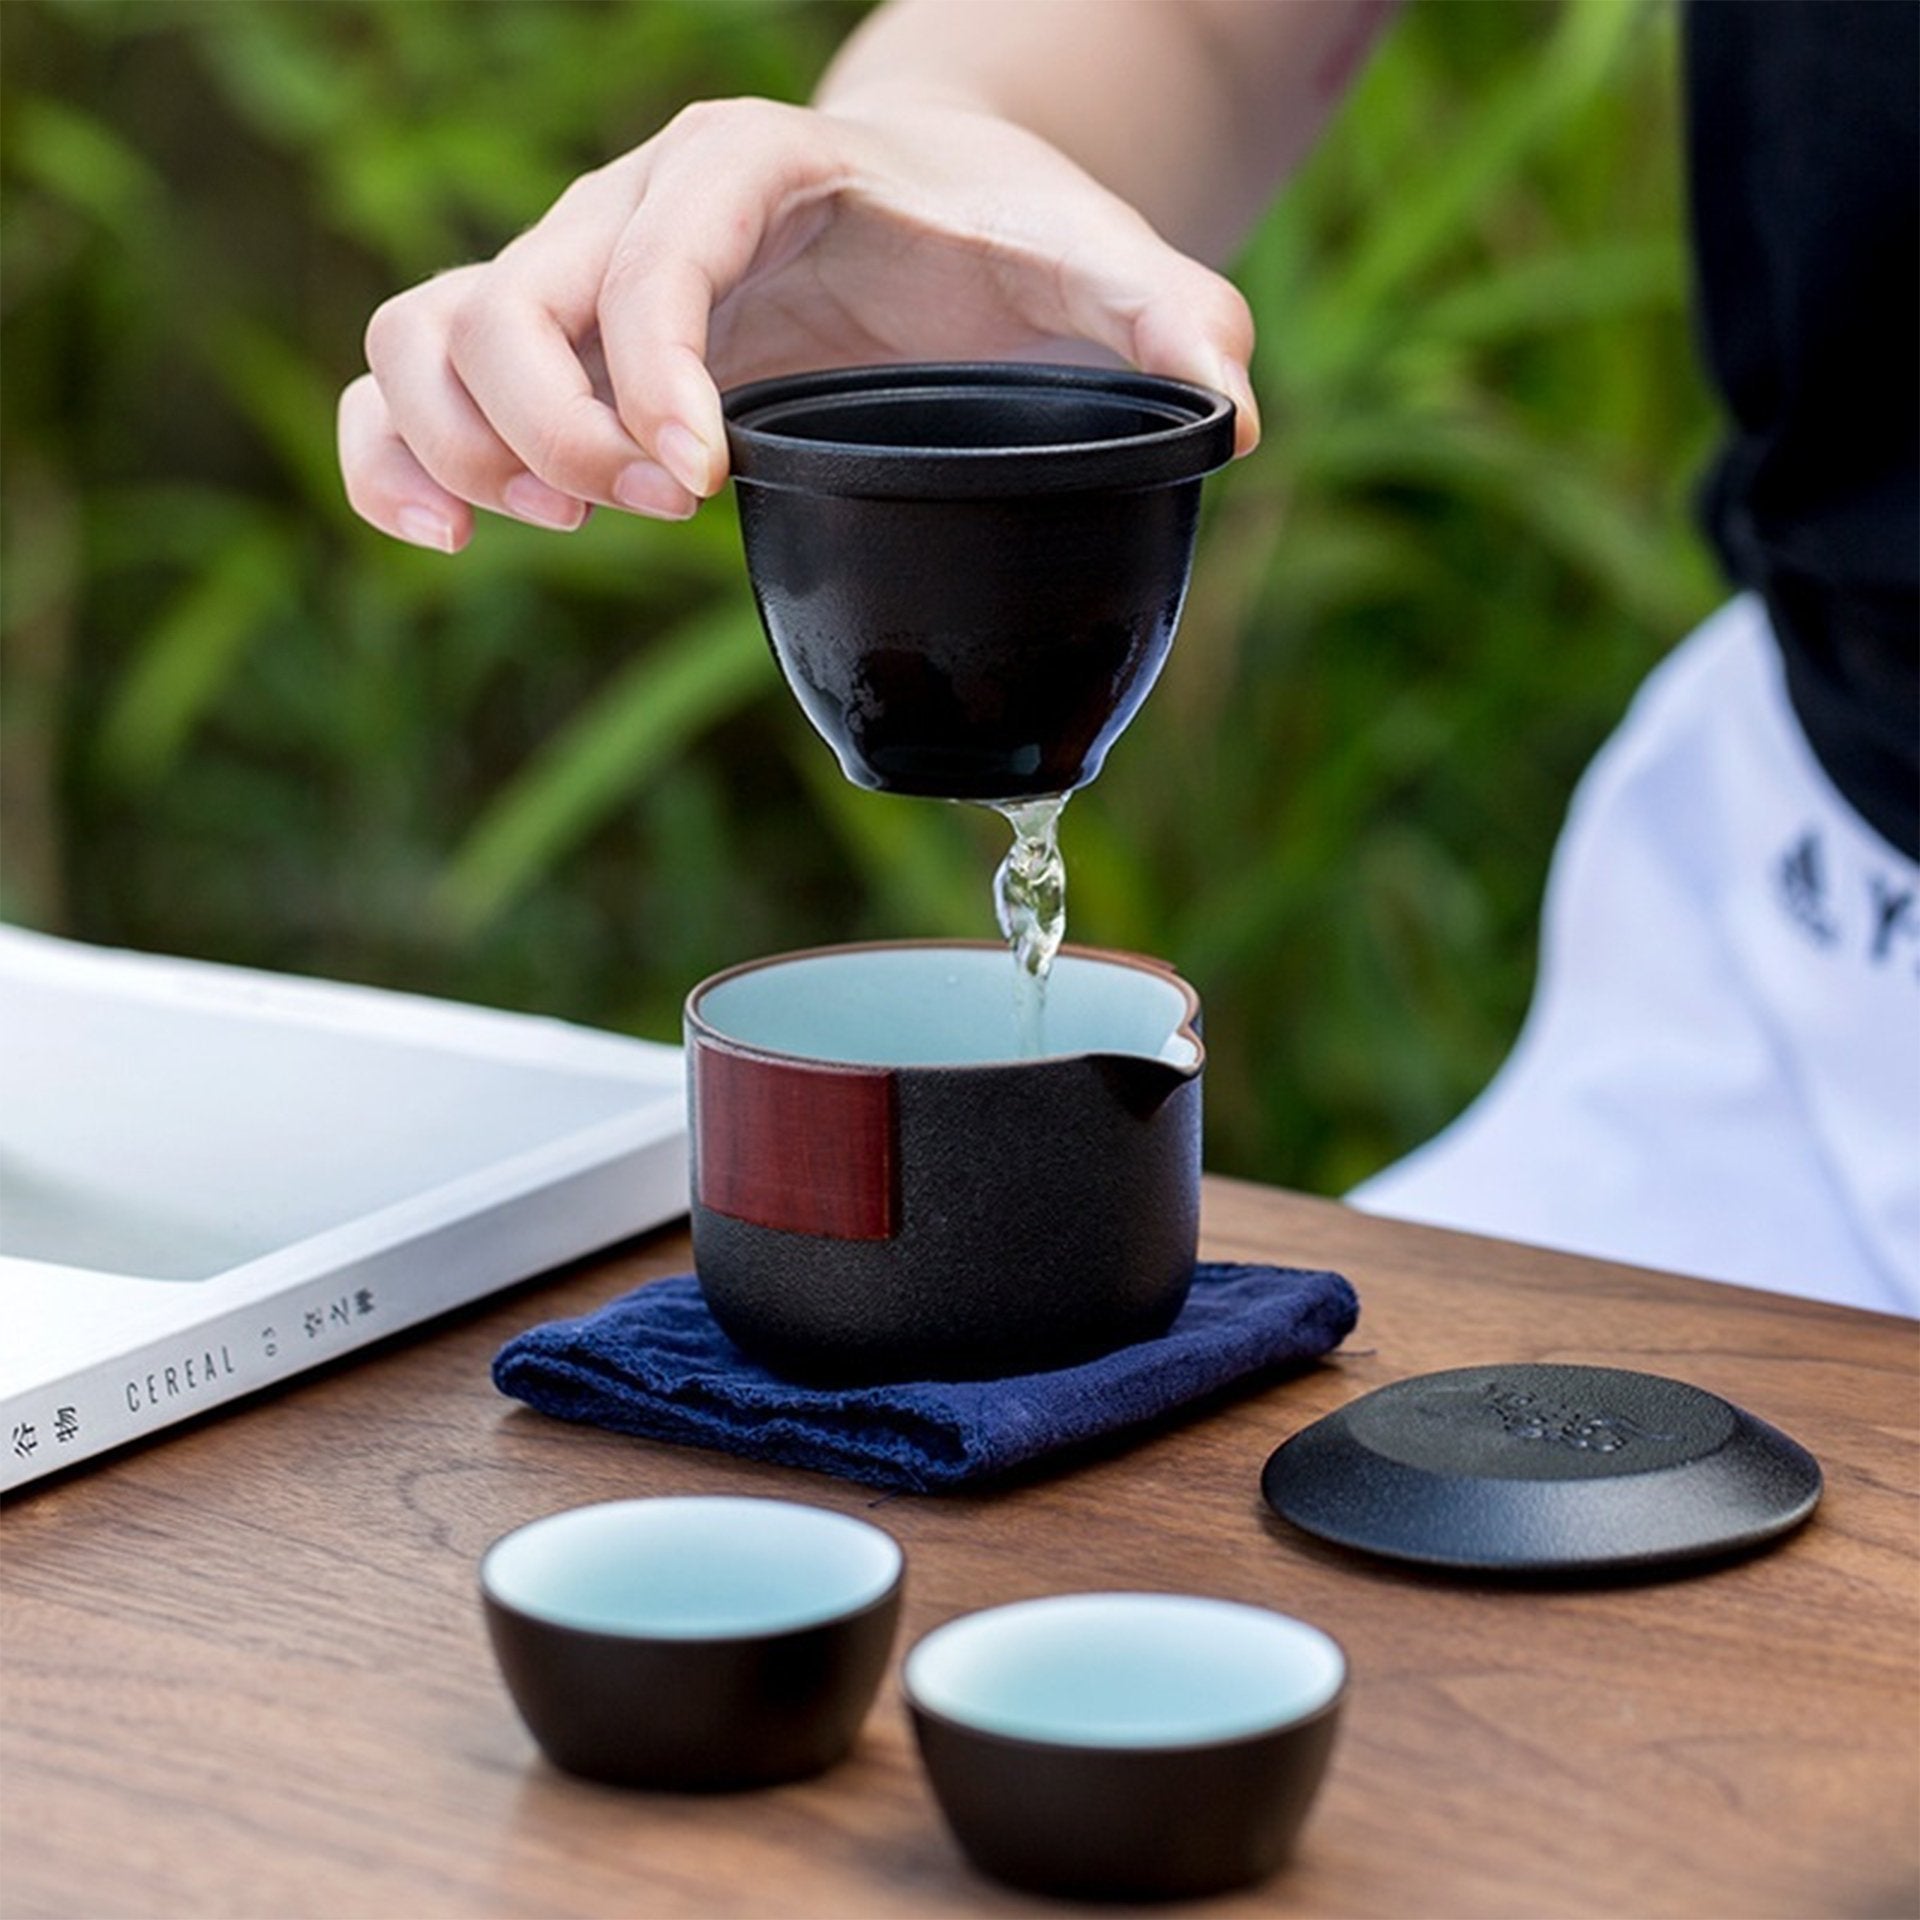 Pouring tea from black ceramic pot to cups on a table.